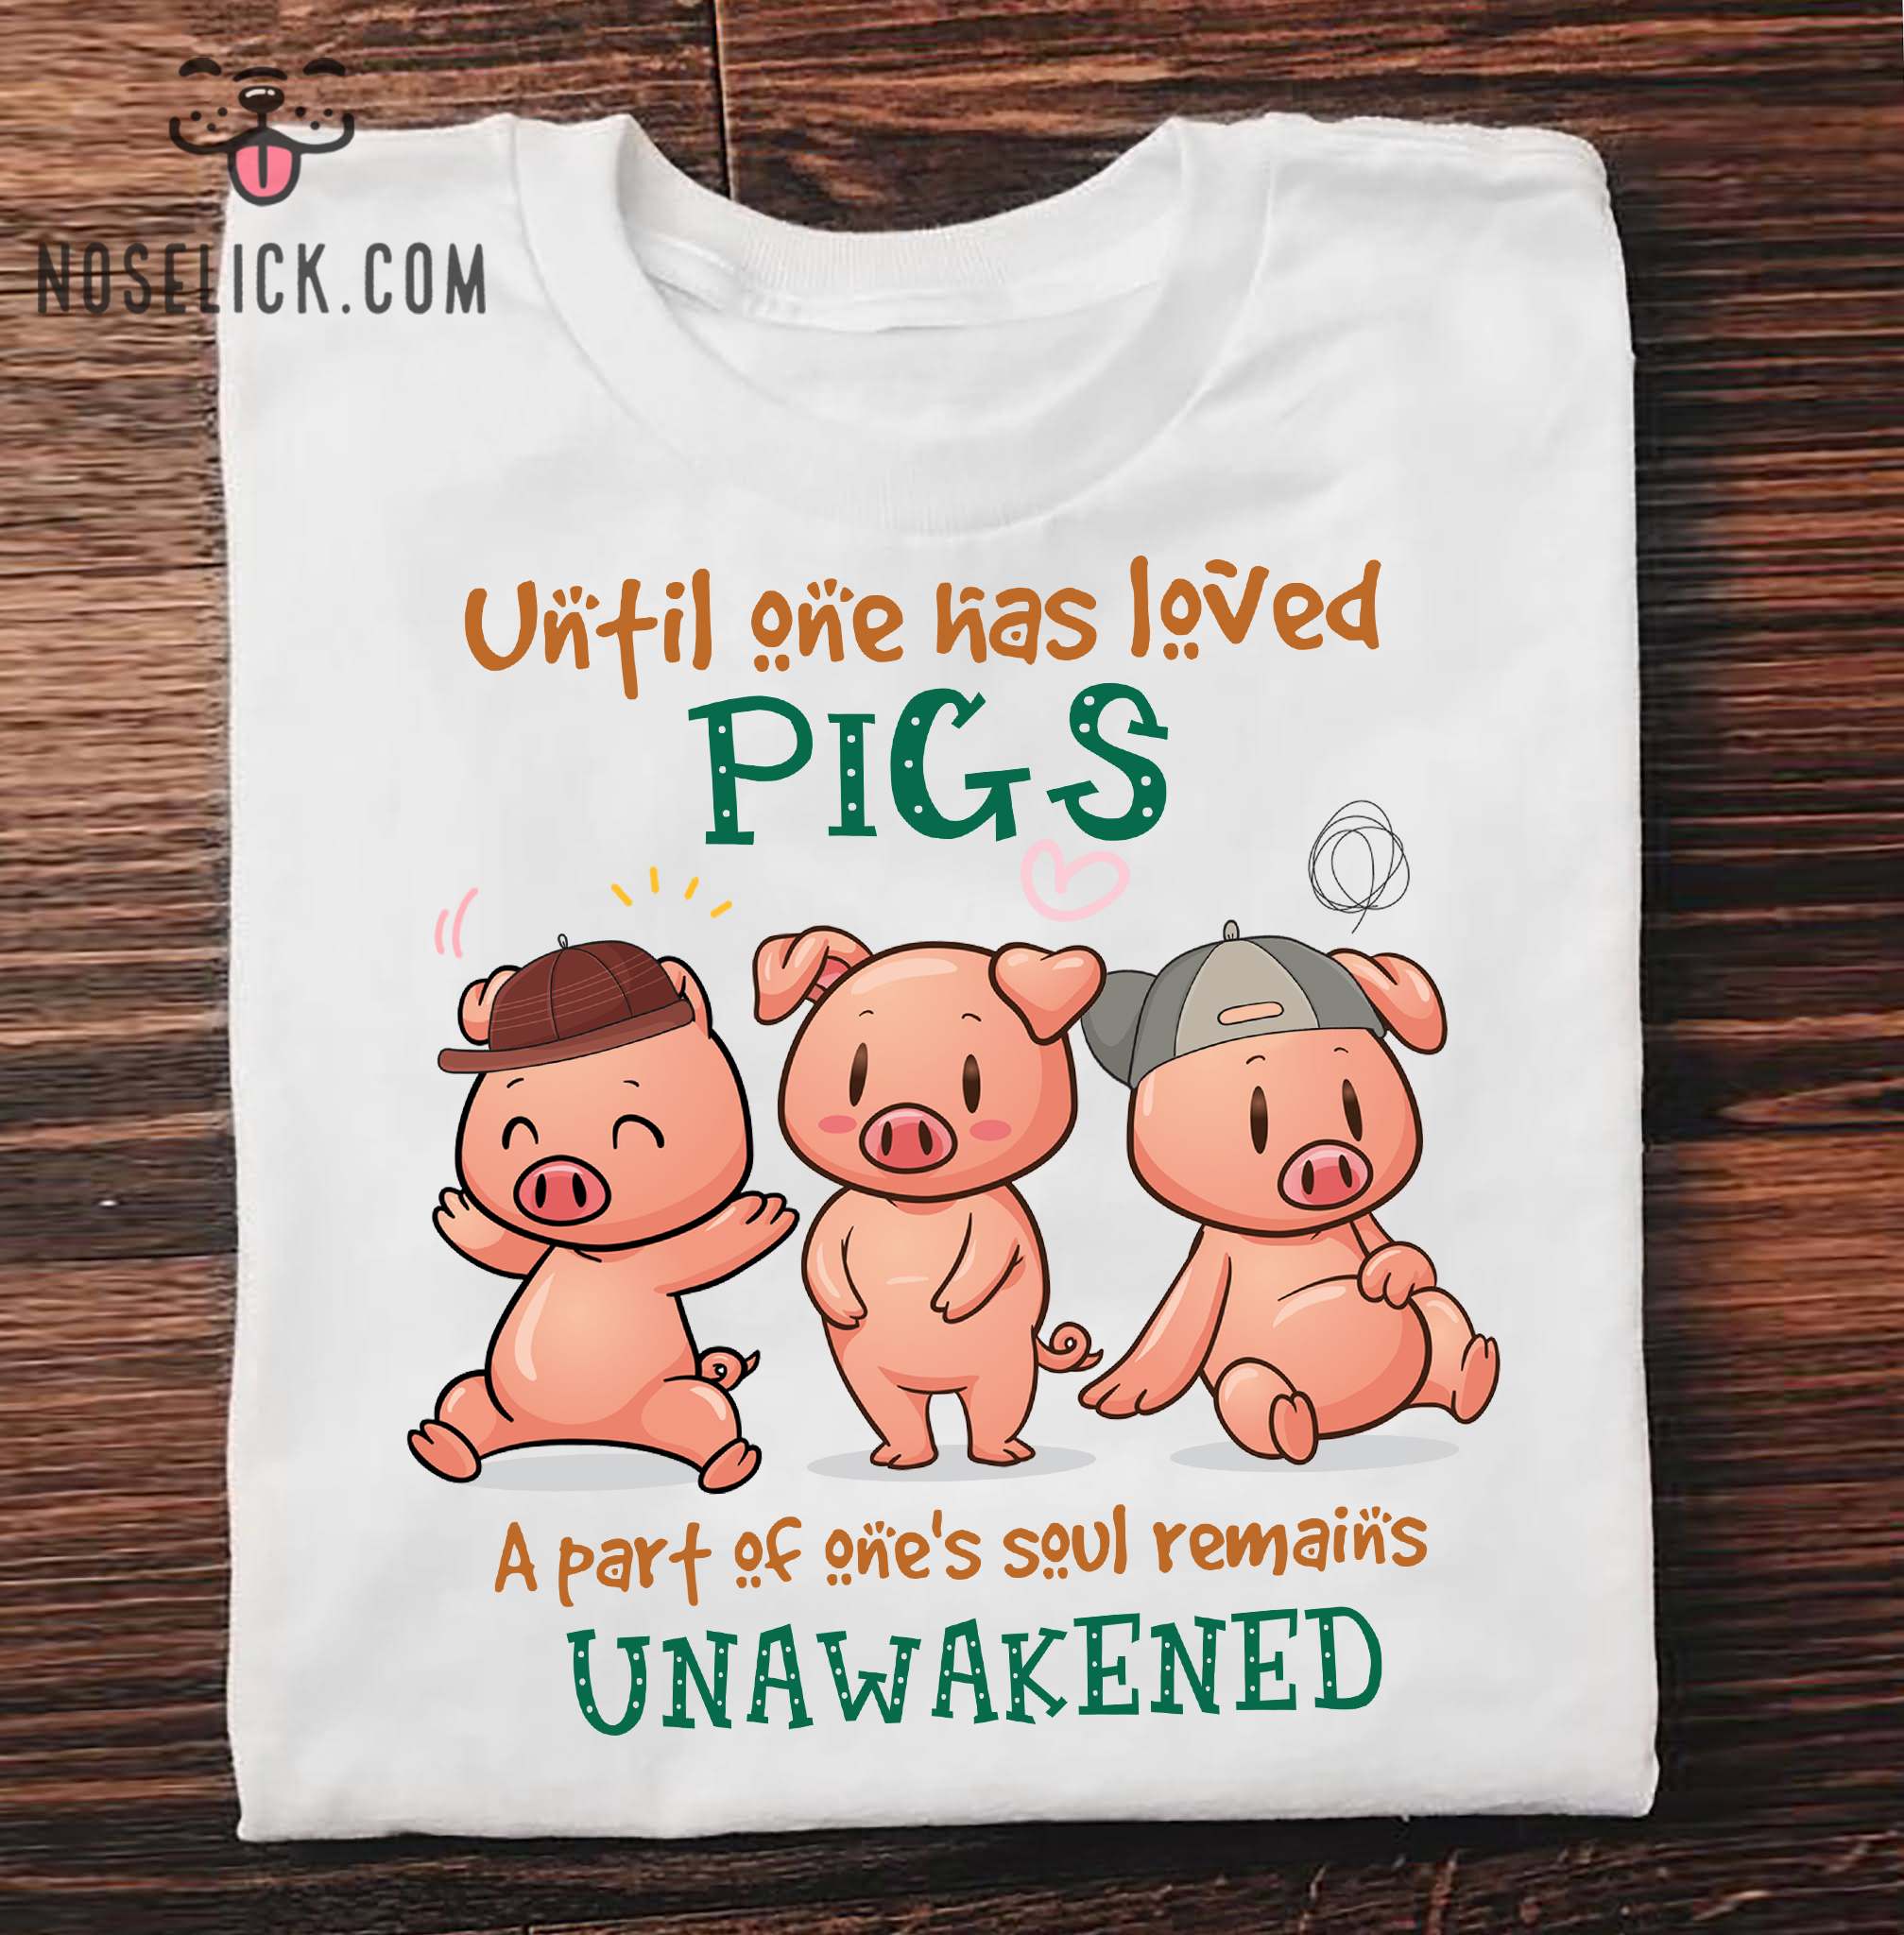 Until one has loved pigs a part of one's soul remains unawakened - Pig lover